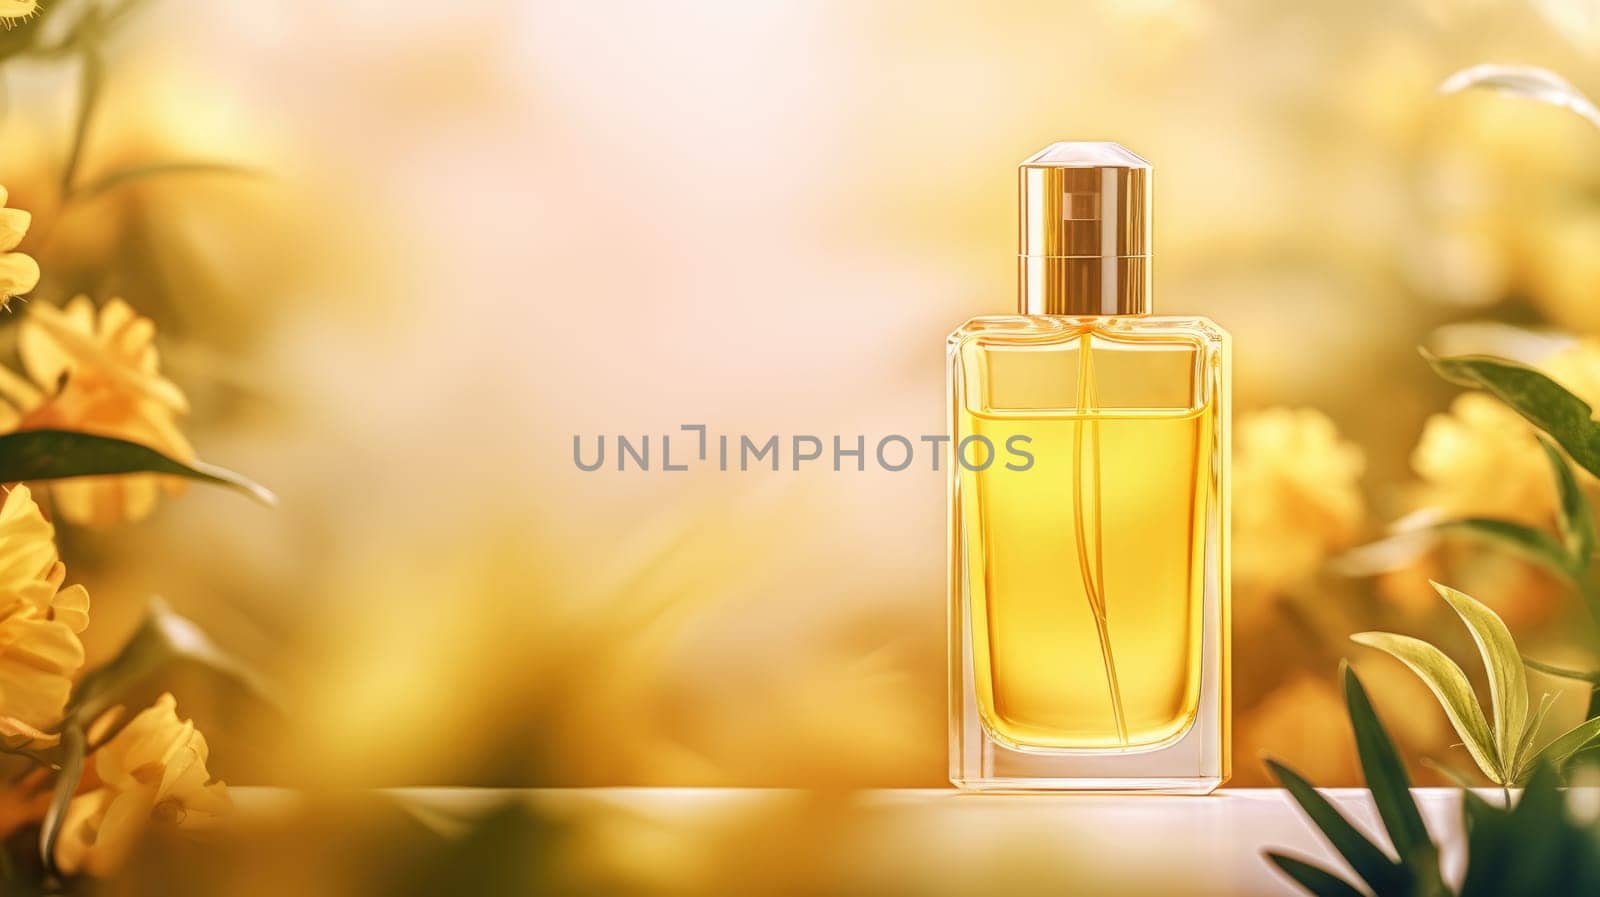 Transparent yellow glass perfume bottle mockup with plants on background. Eau de toilette. Mockup, spring flat lay